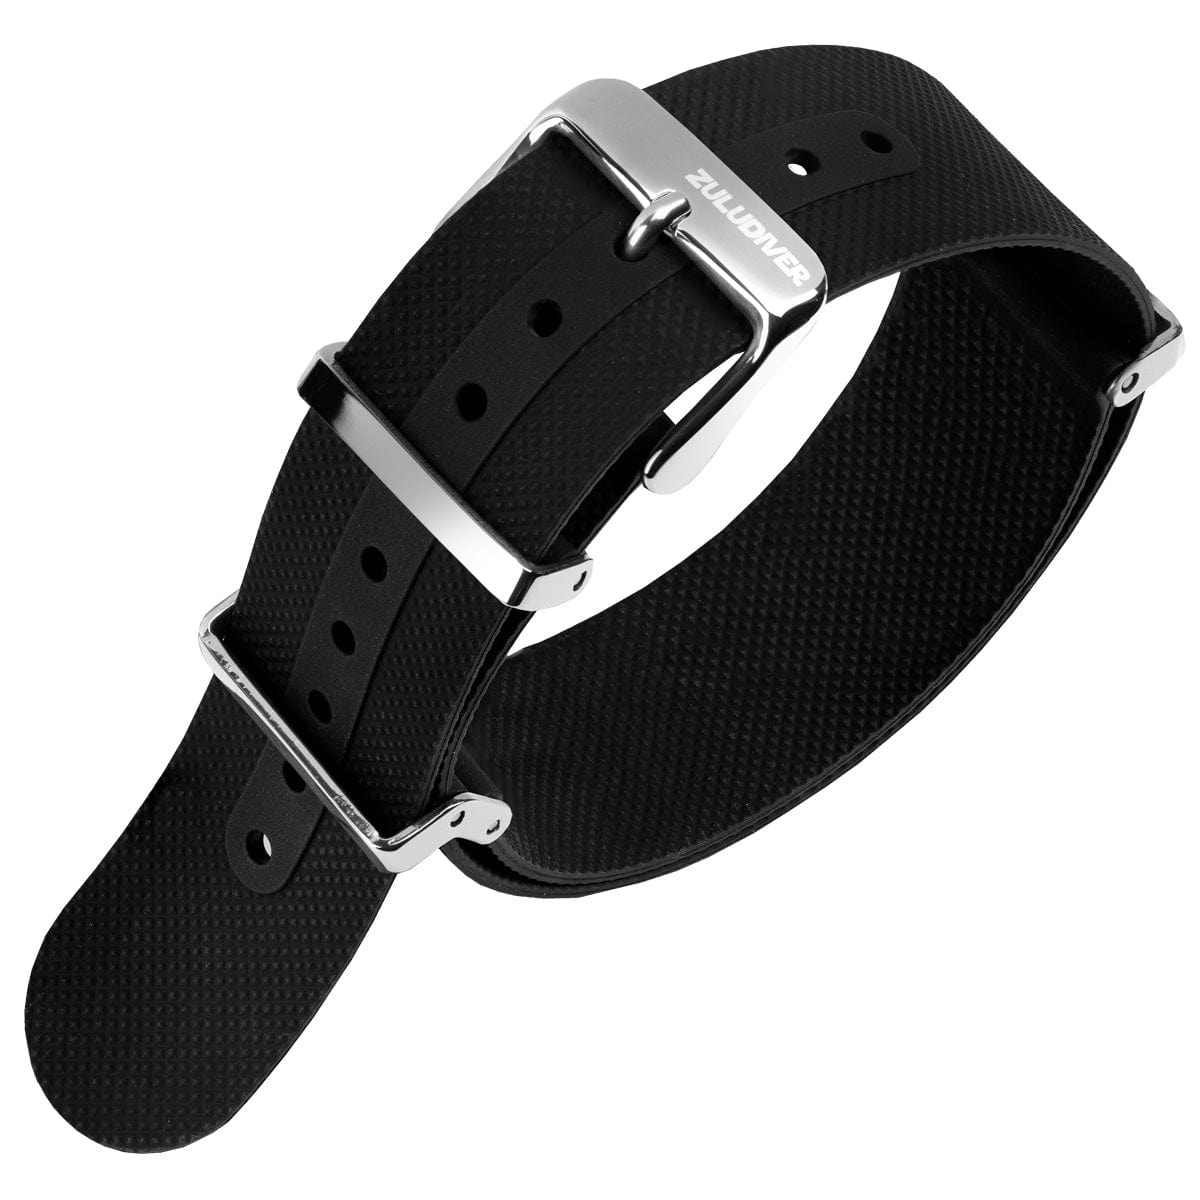 ZULUDIVER Seaton FKM Rubber Military Watch Strap - Black - Brushed Buckles